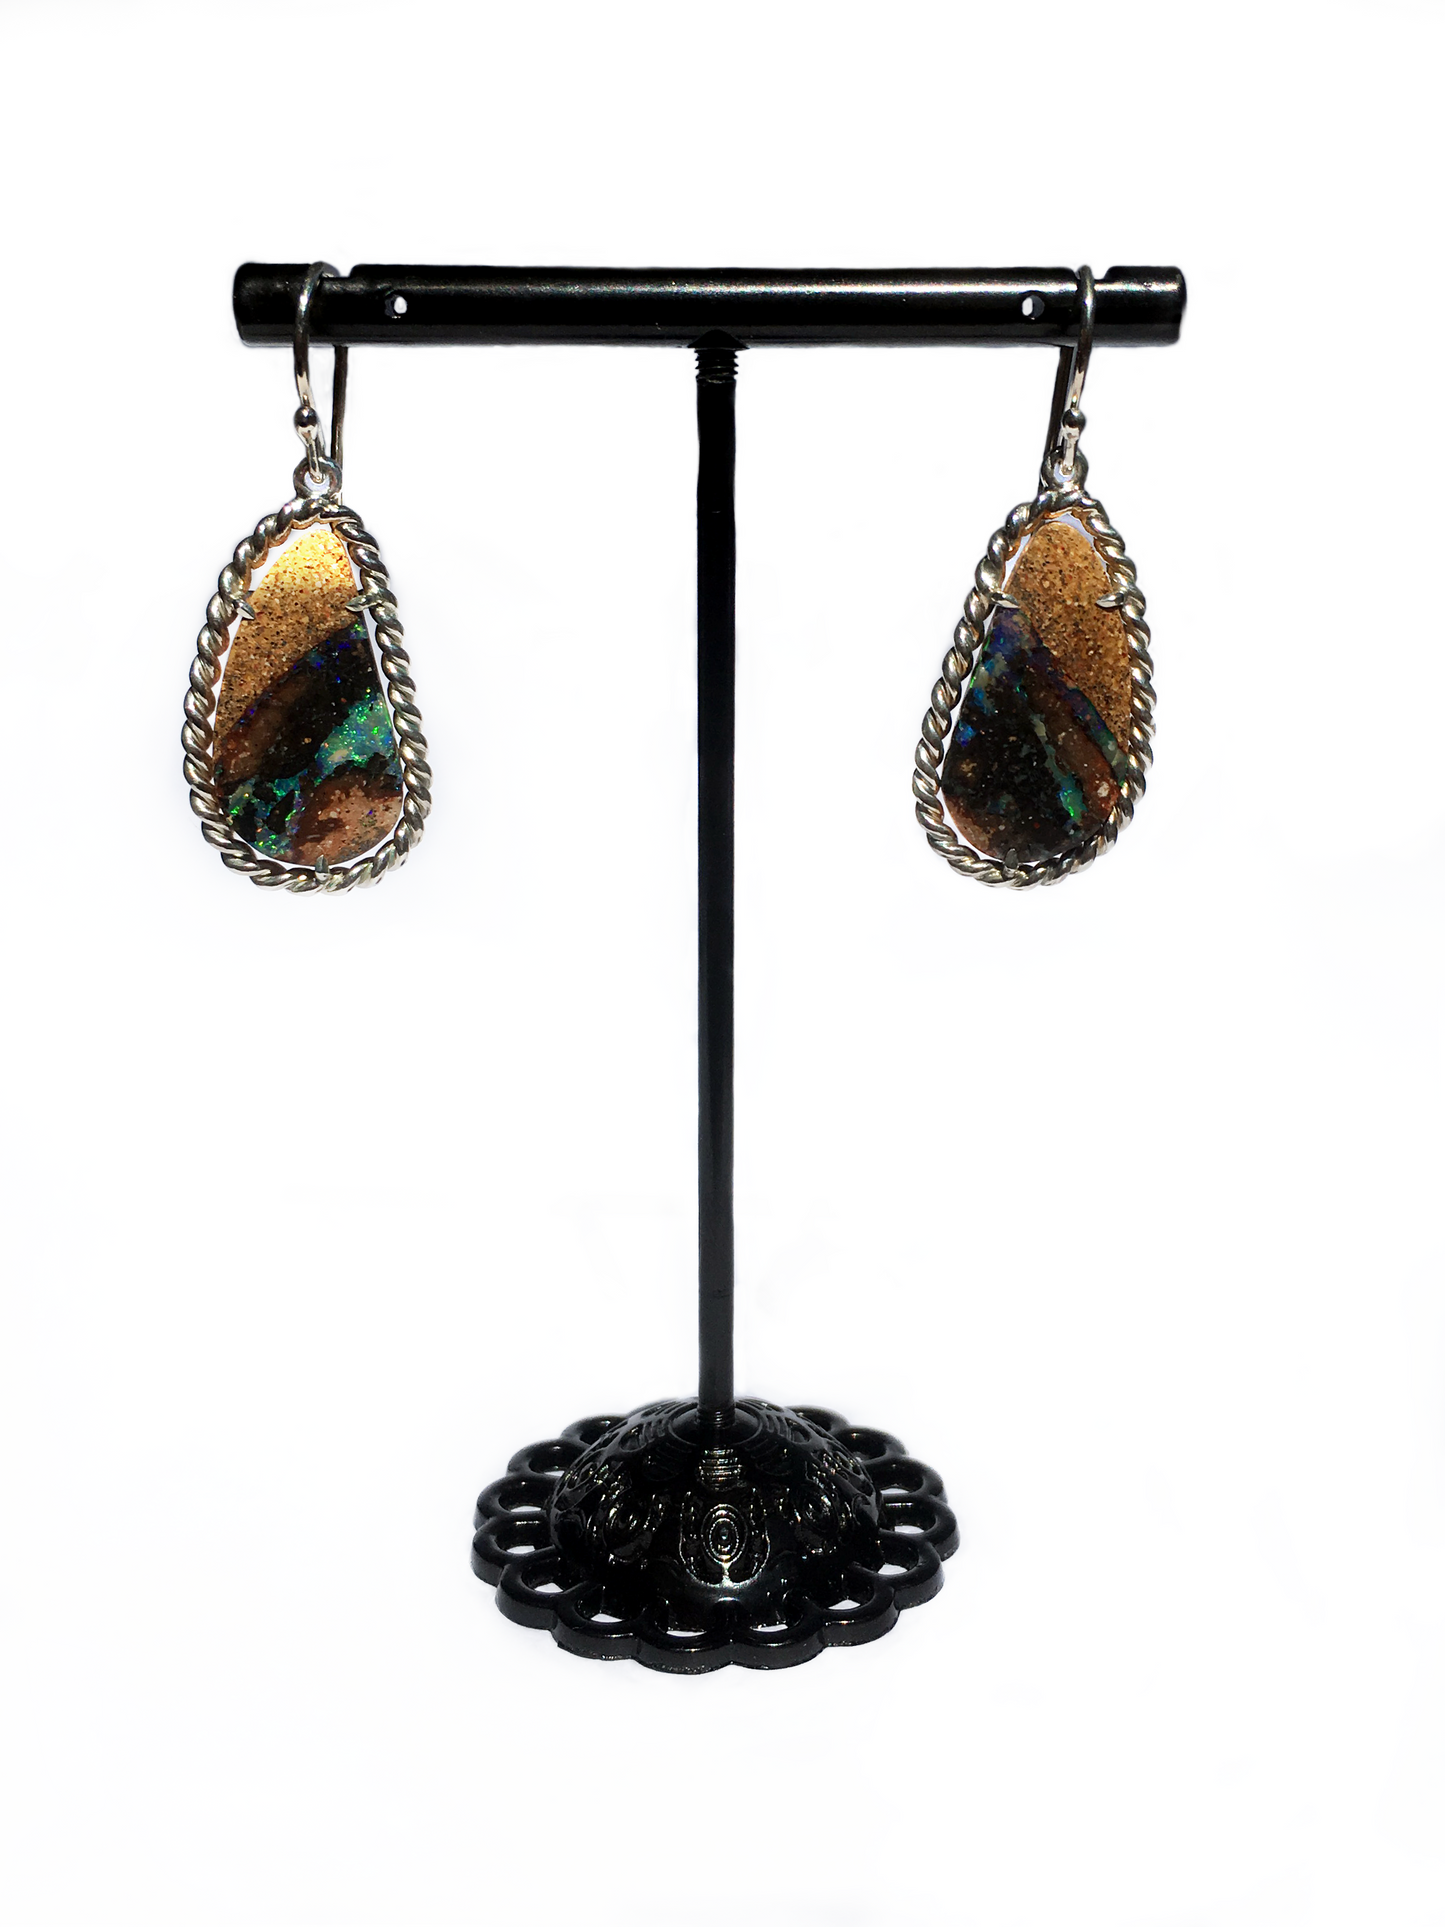 Queensland boulder opal drop earrings with a silver twist frame. Handcrafted, Australian made ethical jewellery with locally sourced Queensland products. Queensland boulder opal with stone, greens and blues. 